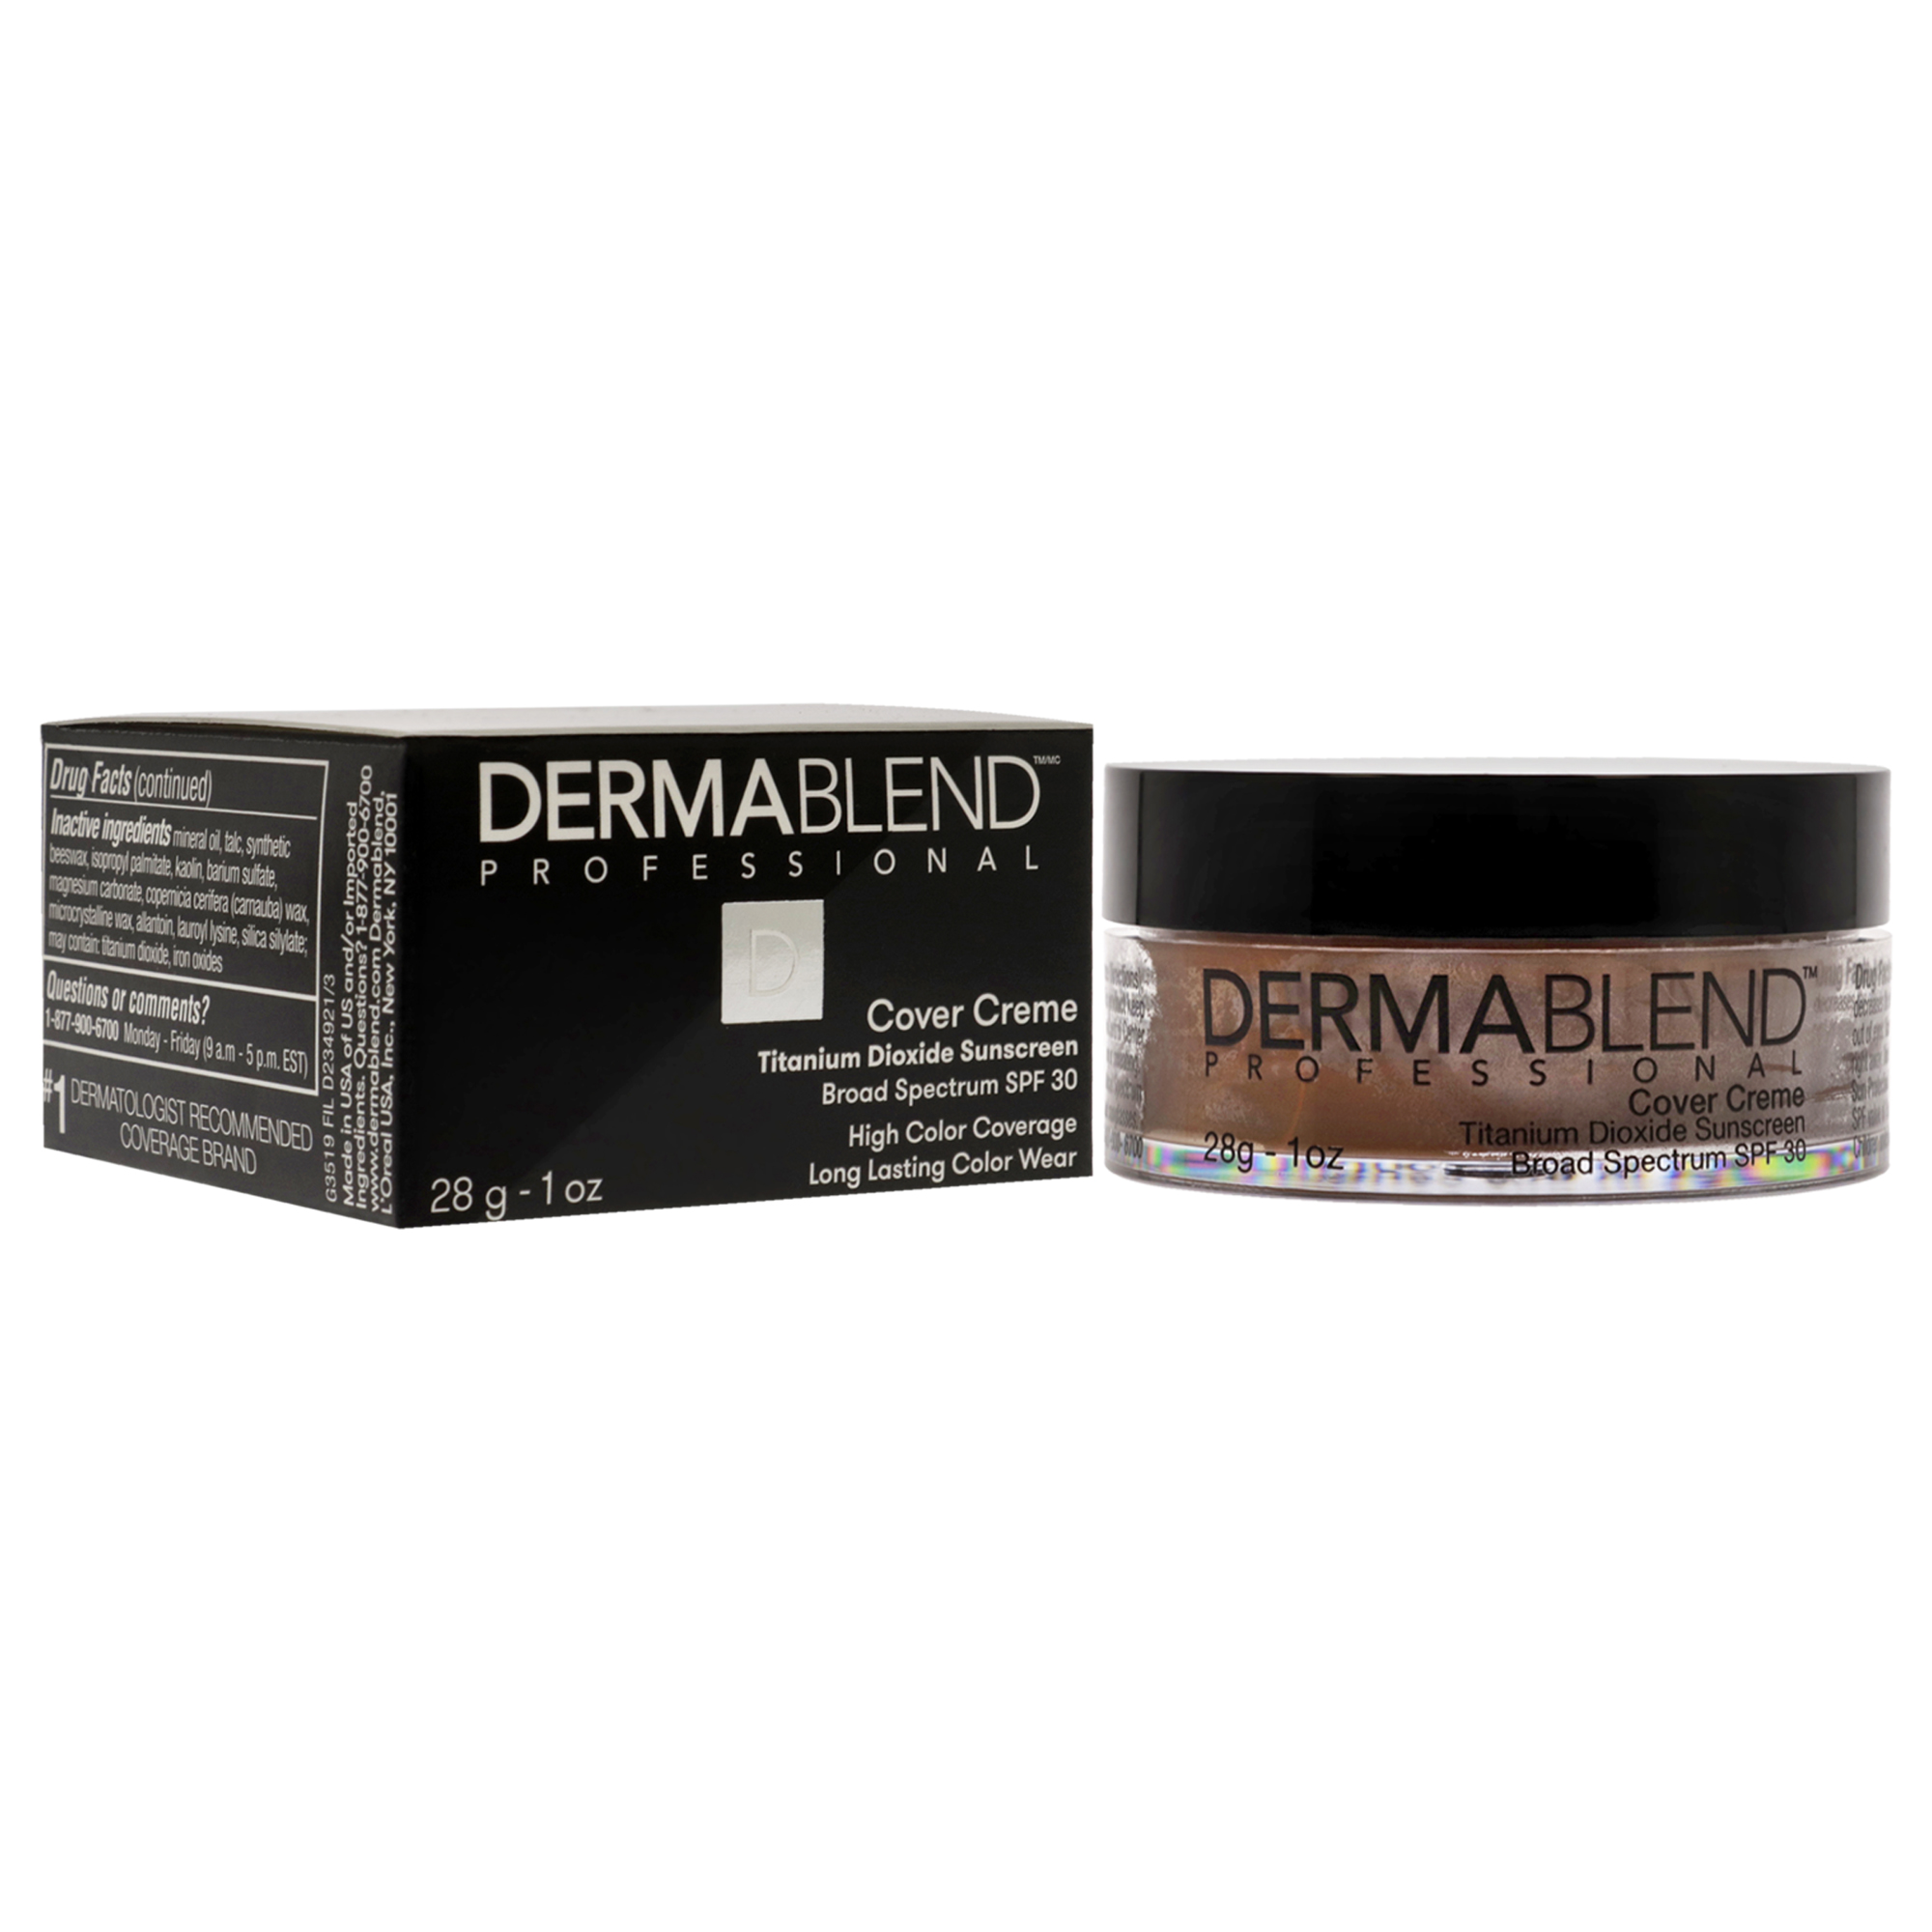 Dermablend Cover Creme High Color Coverage SPF 30 - 90N Deep Brown , 1 oz Foundation - image 3 of 6